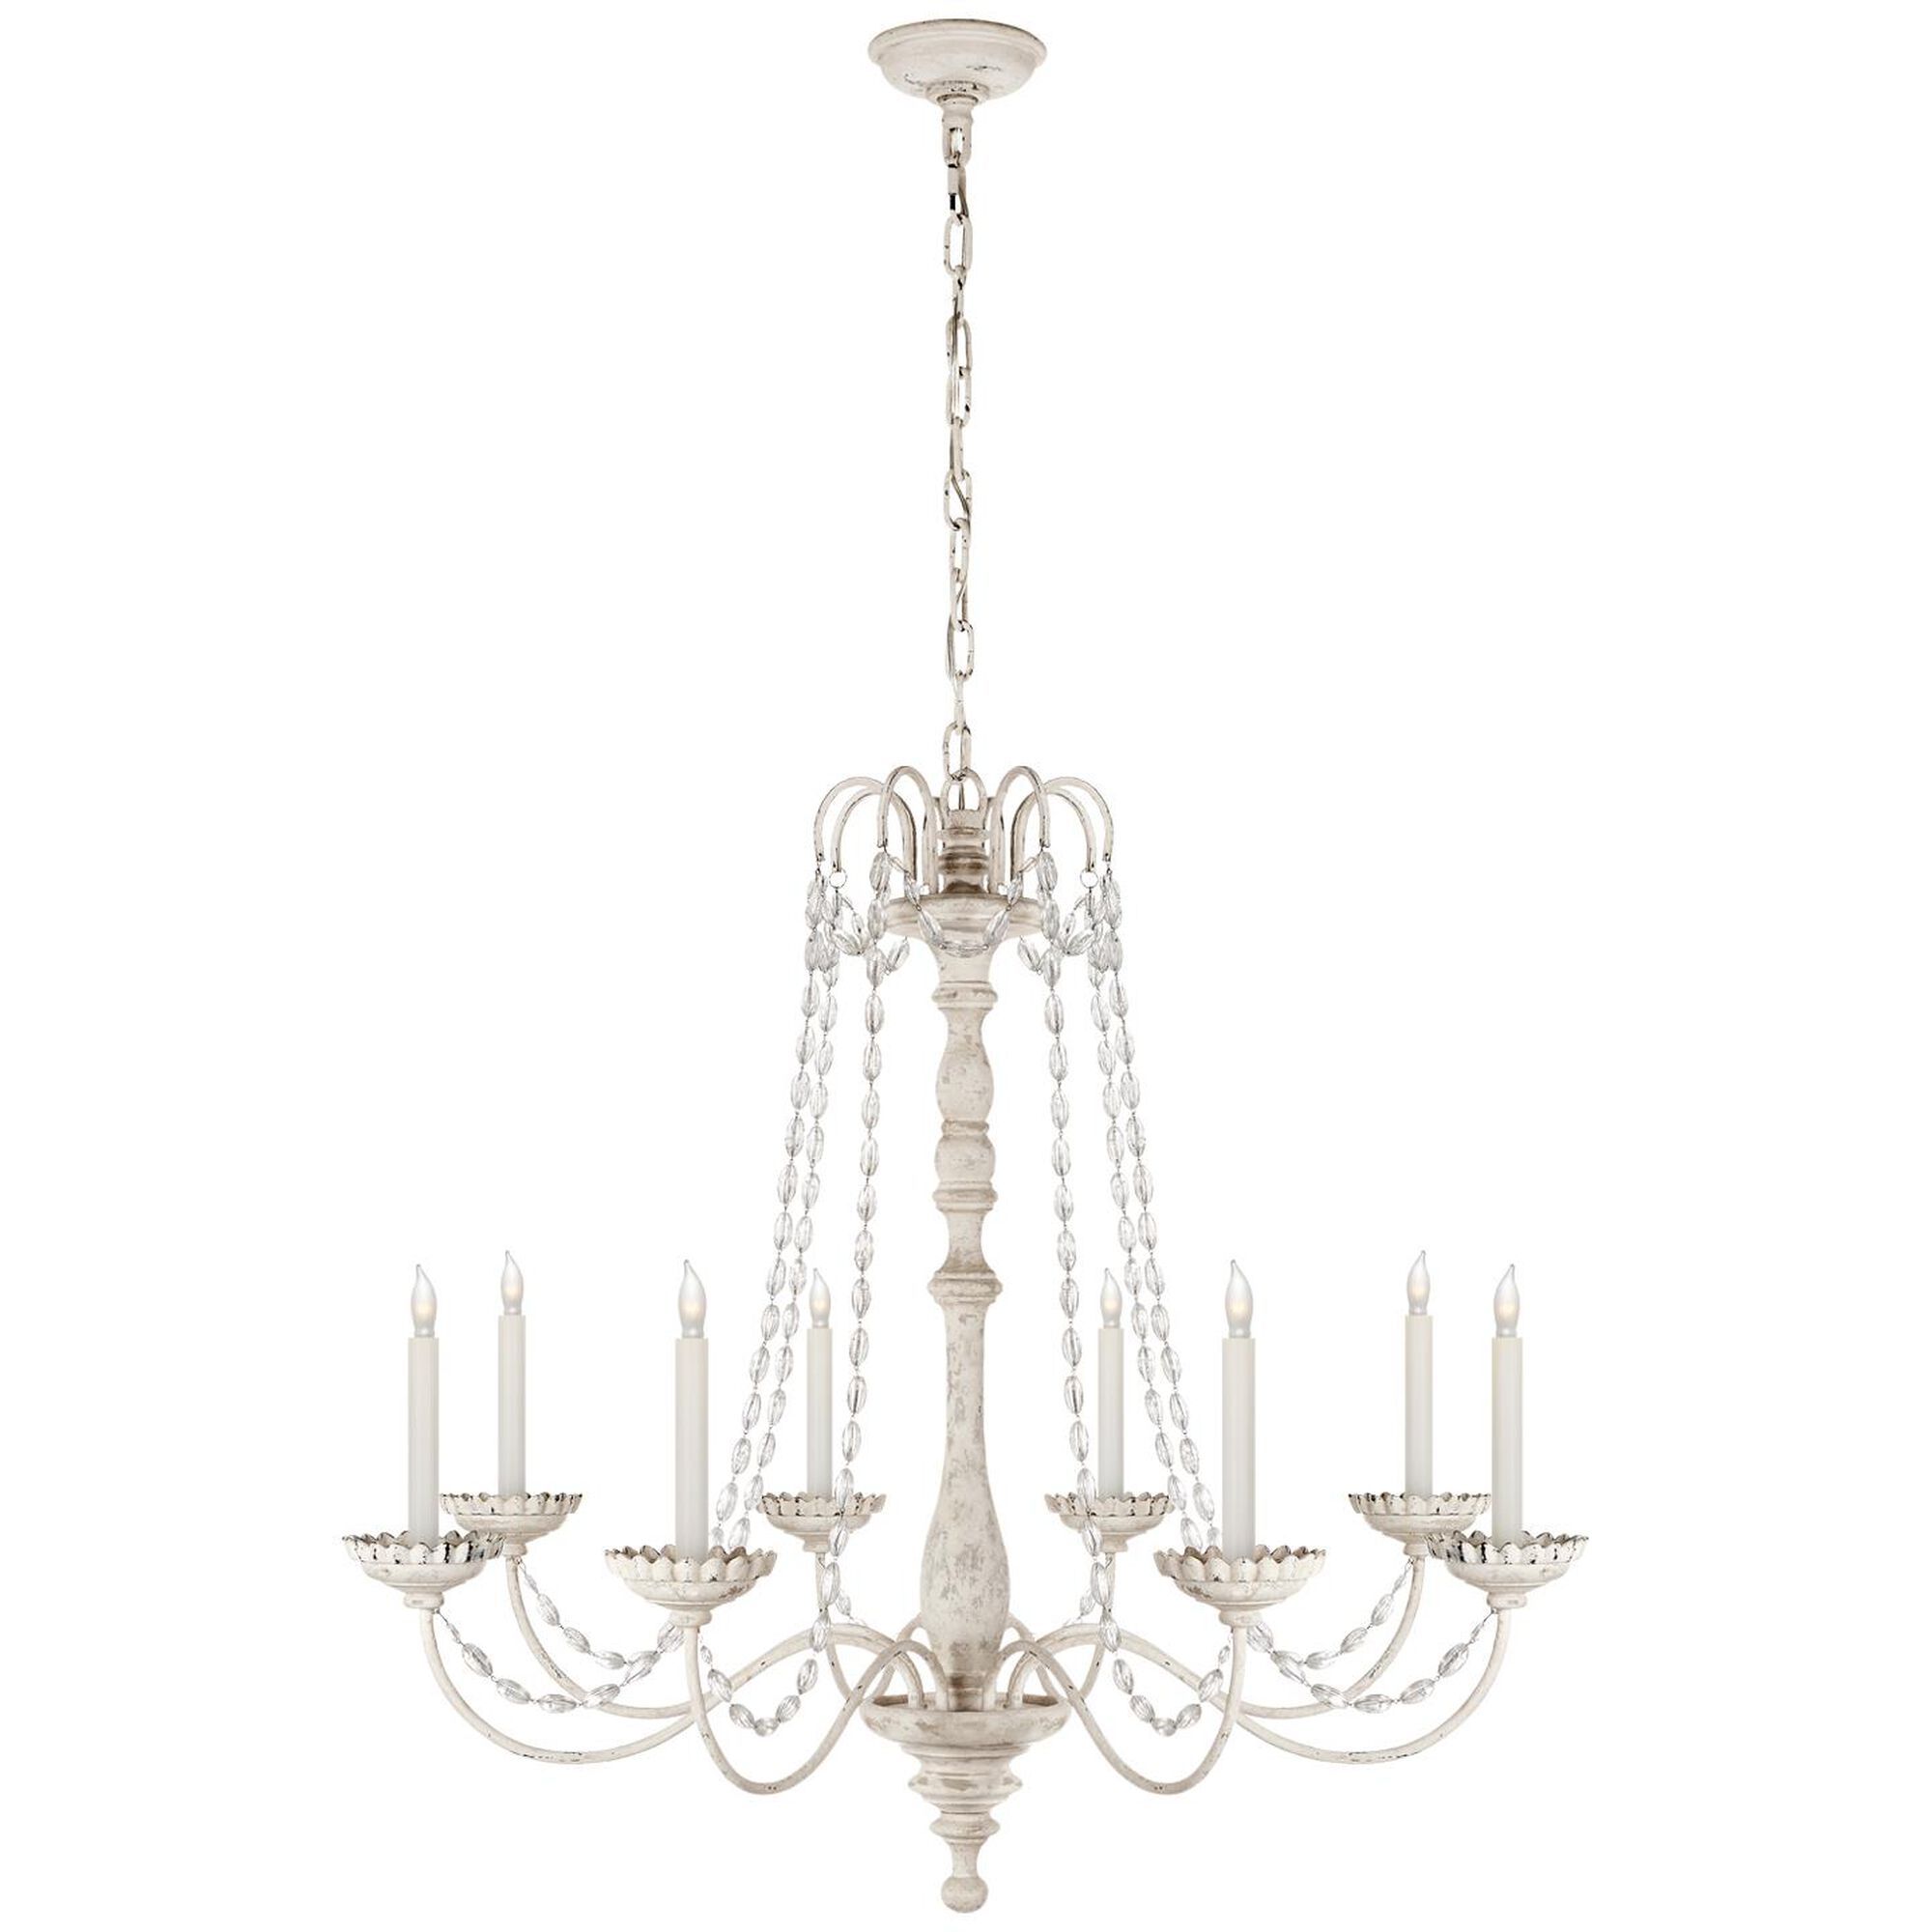 Chapman & Myers Flanders 36 Inch 8 Light Chandelier by Visual Comfort Signature Collection | 1800 Lighting